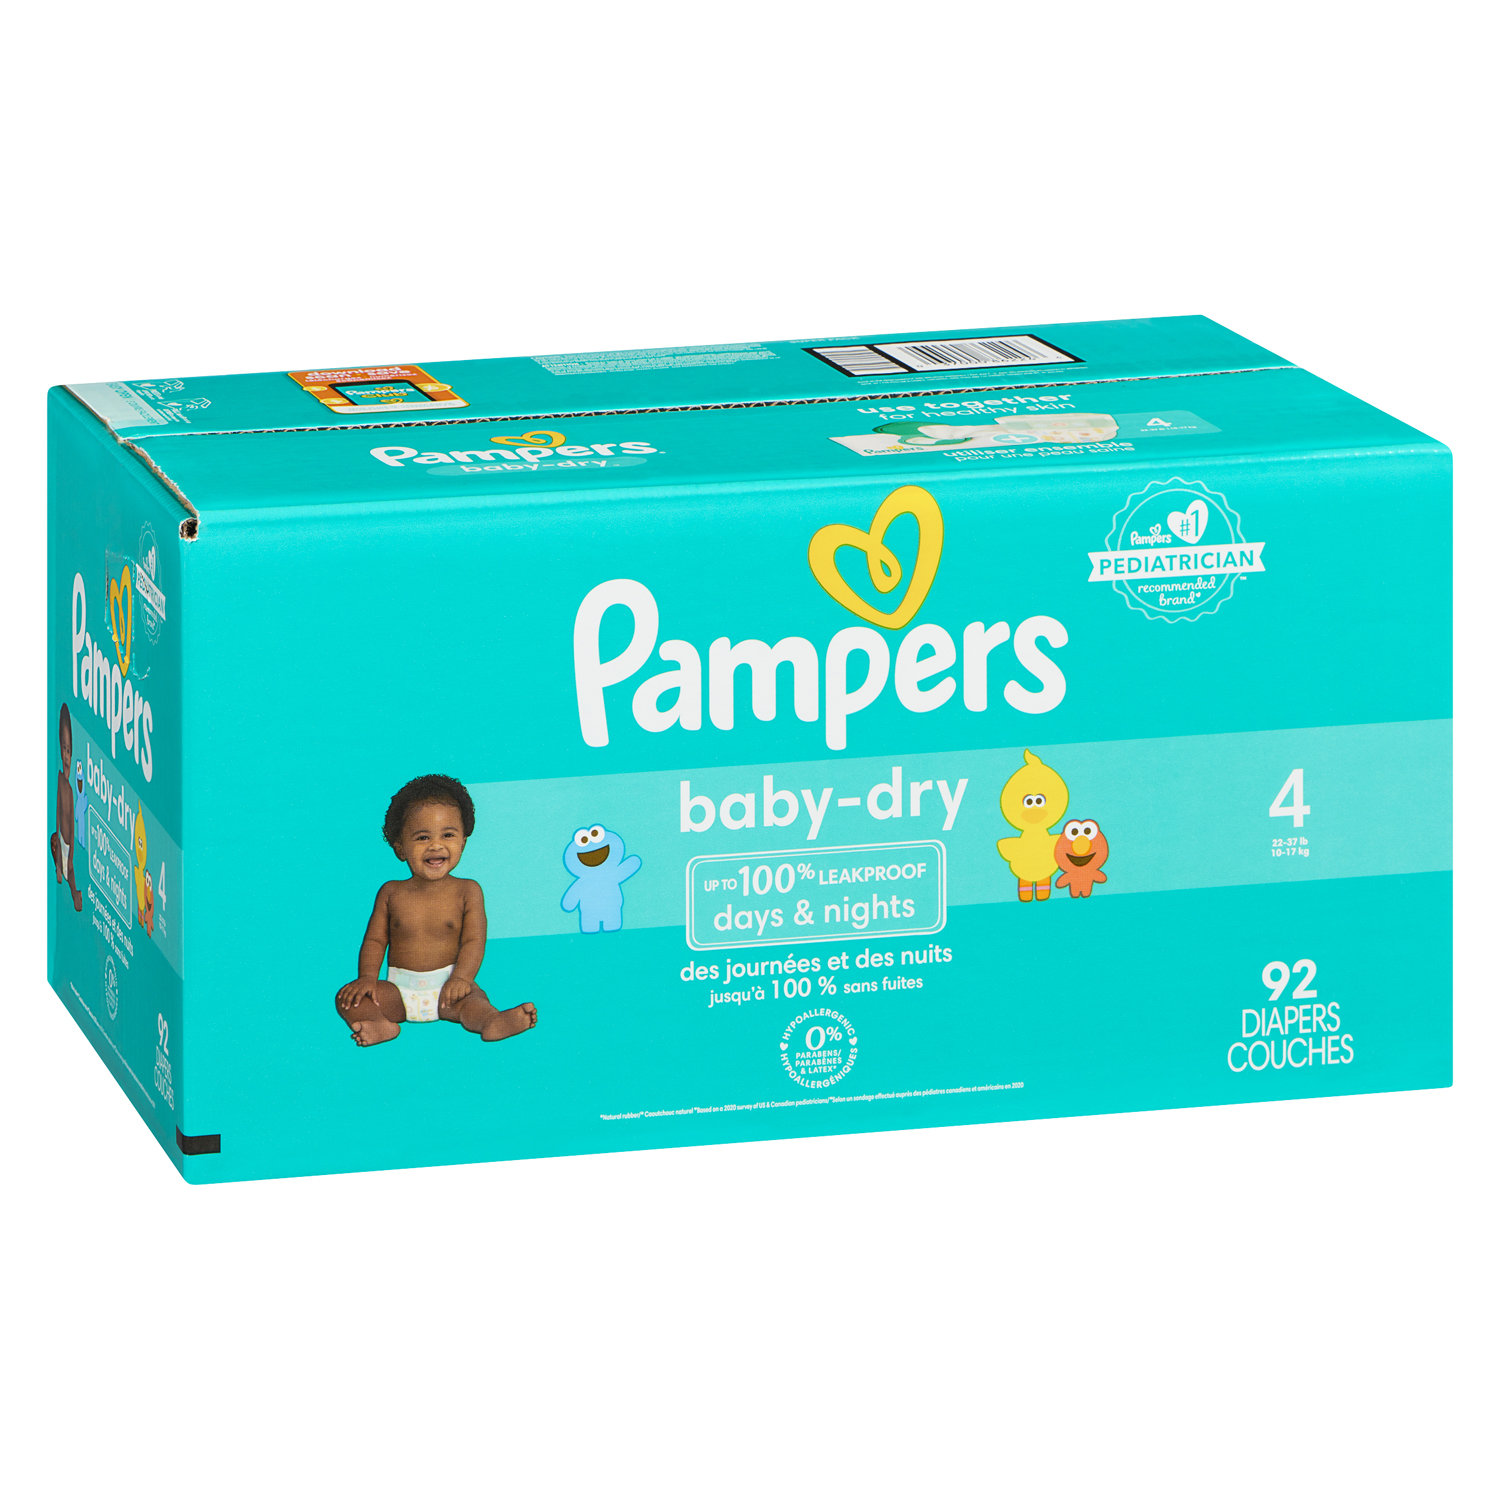 Pampers Pure Protection Diapers Size 4, 22 count, 2 pack- Disposable Diapers